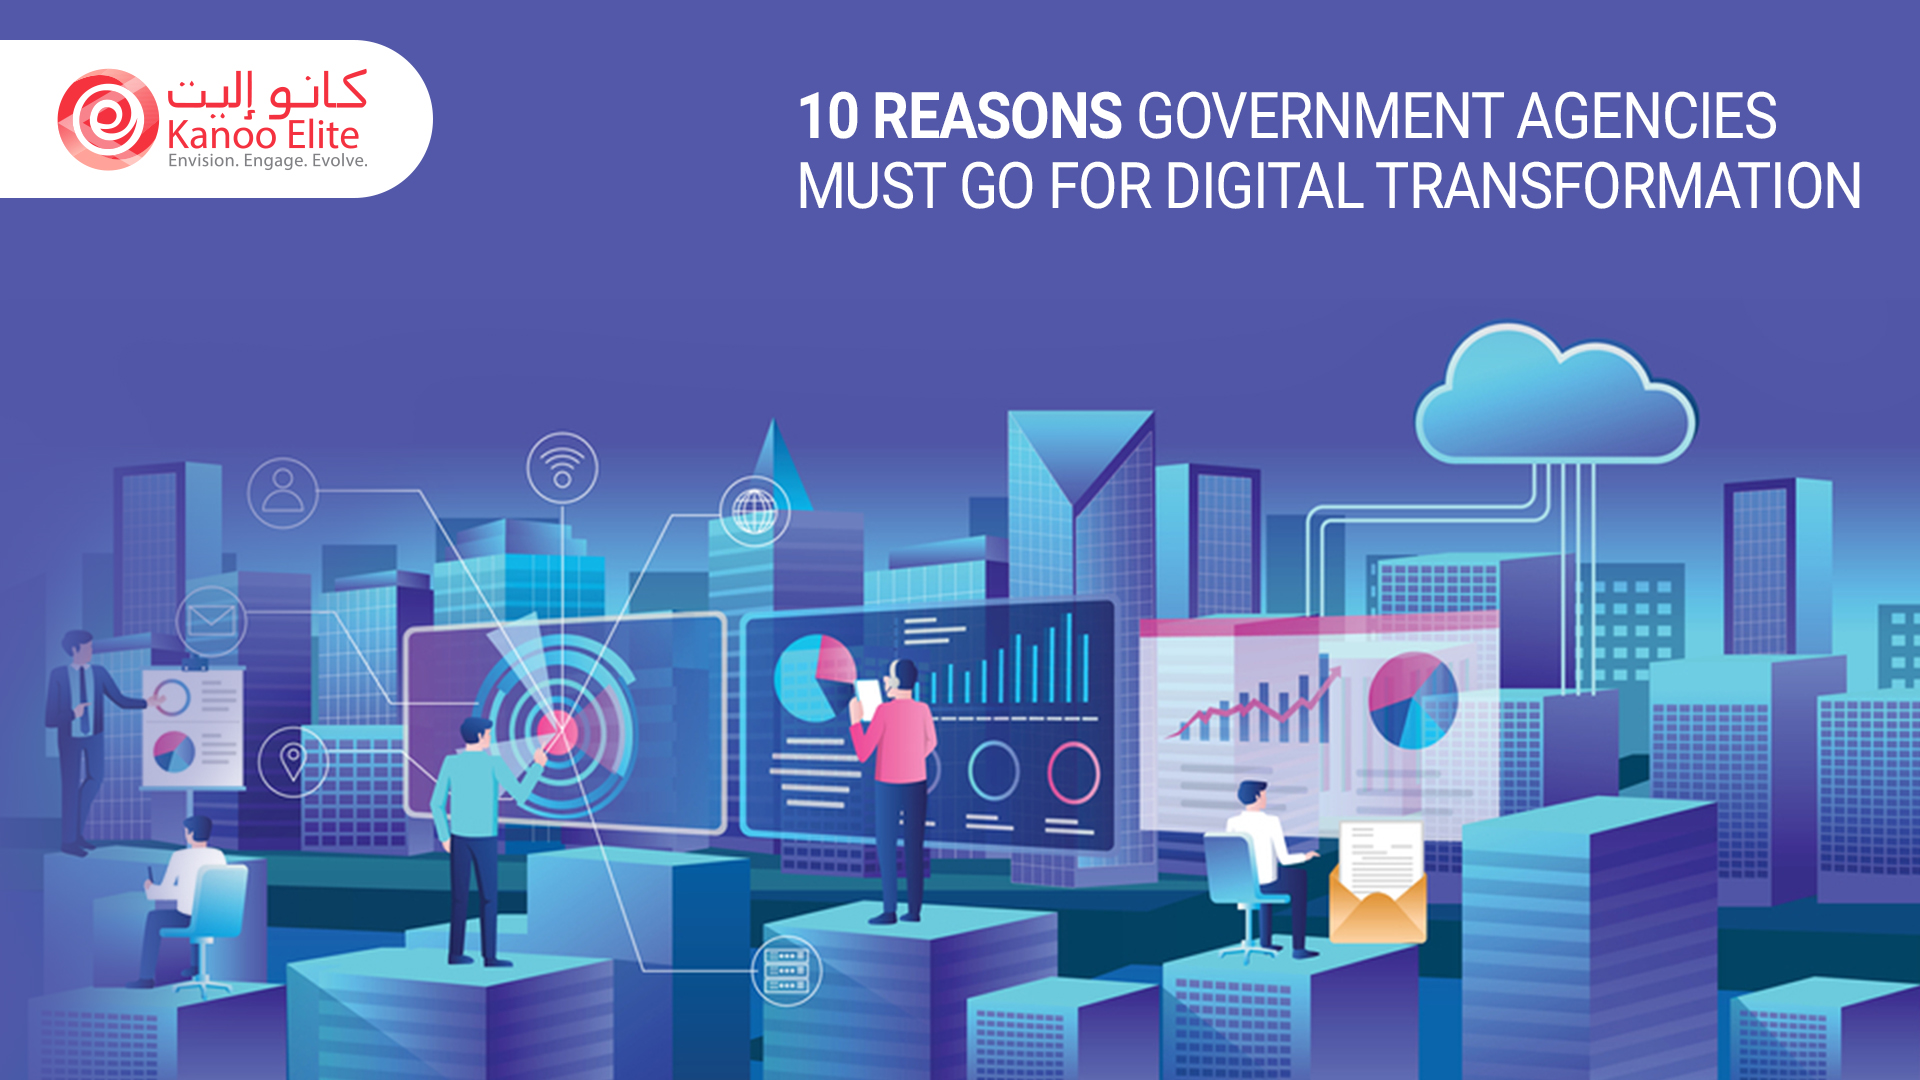 10 Reasons Government Agencies Must Go for Digital Transformation